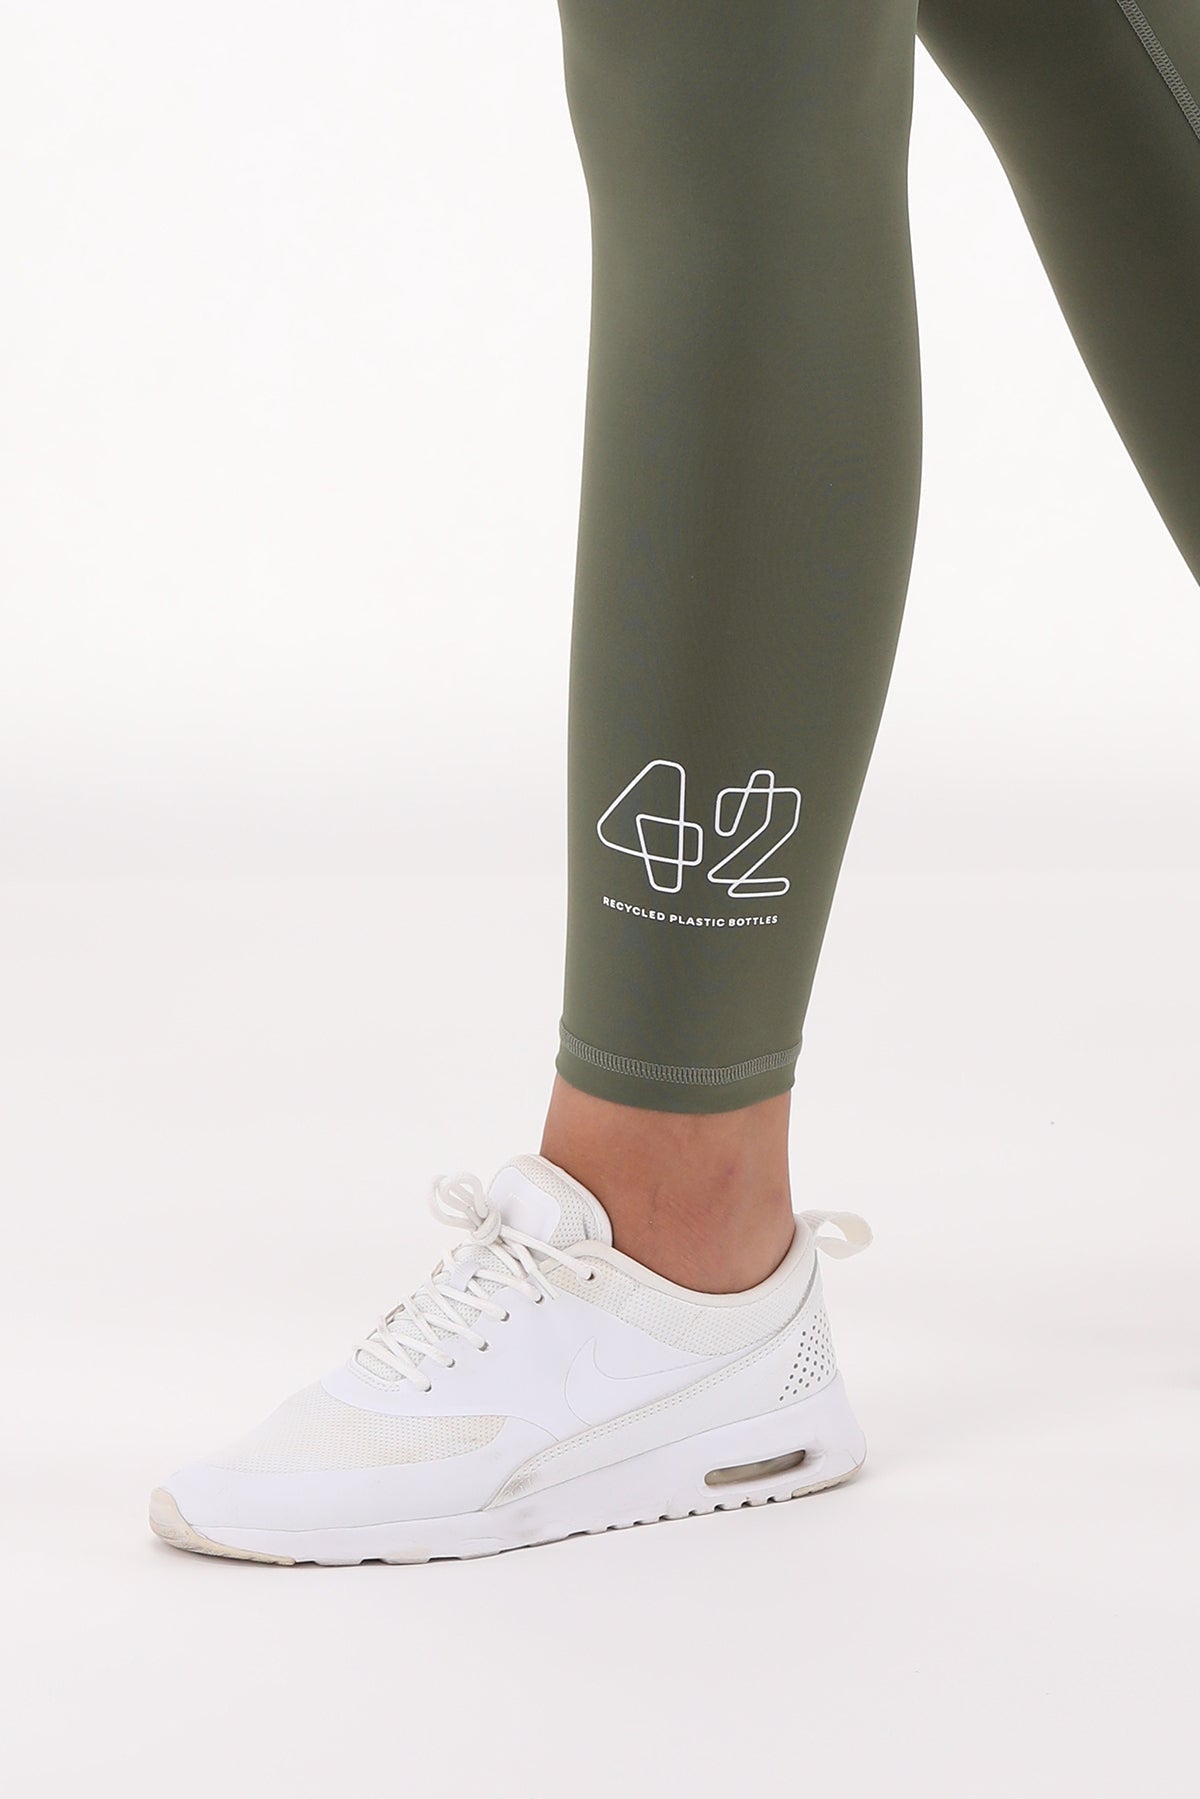 N E W | D E S I G N Belinz Seamless High Waist Scrunchbum Sports Leggings🌿  With a high waist and Hip line design show your edge and… | Instagram